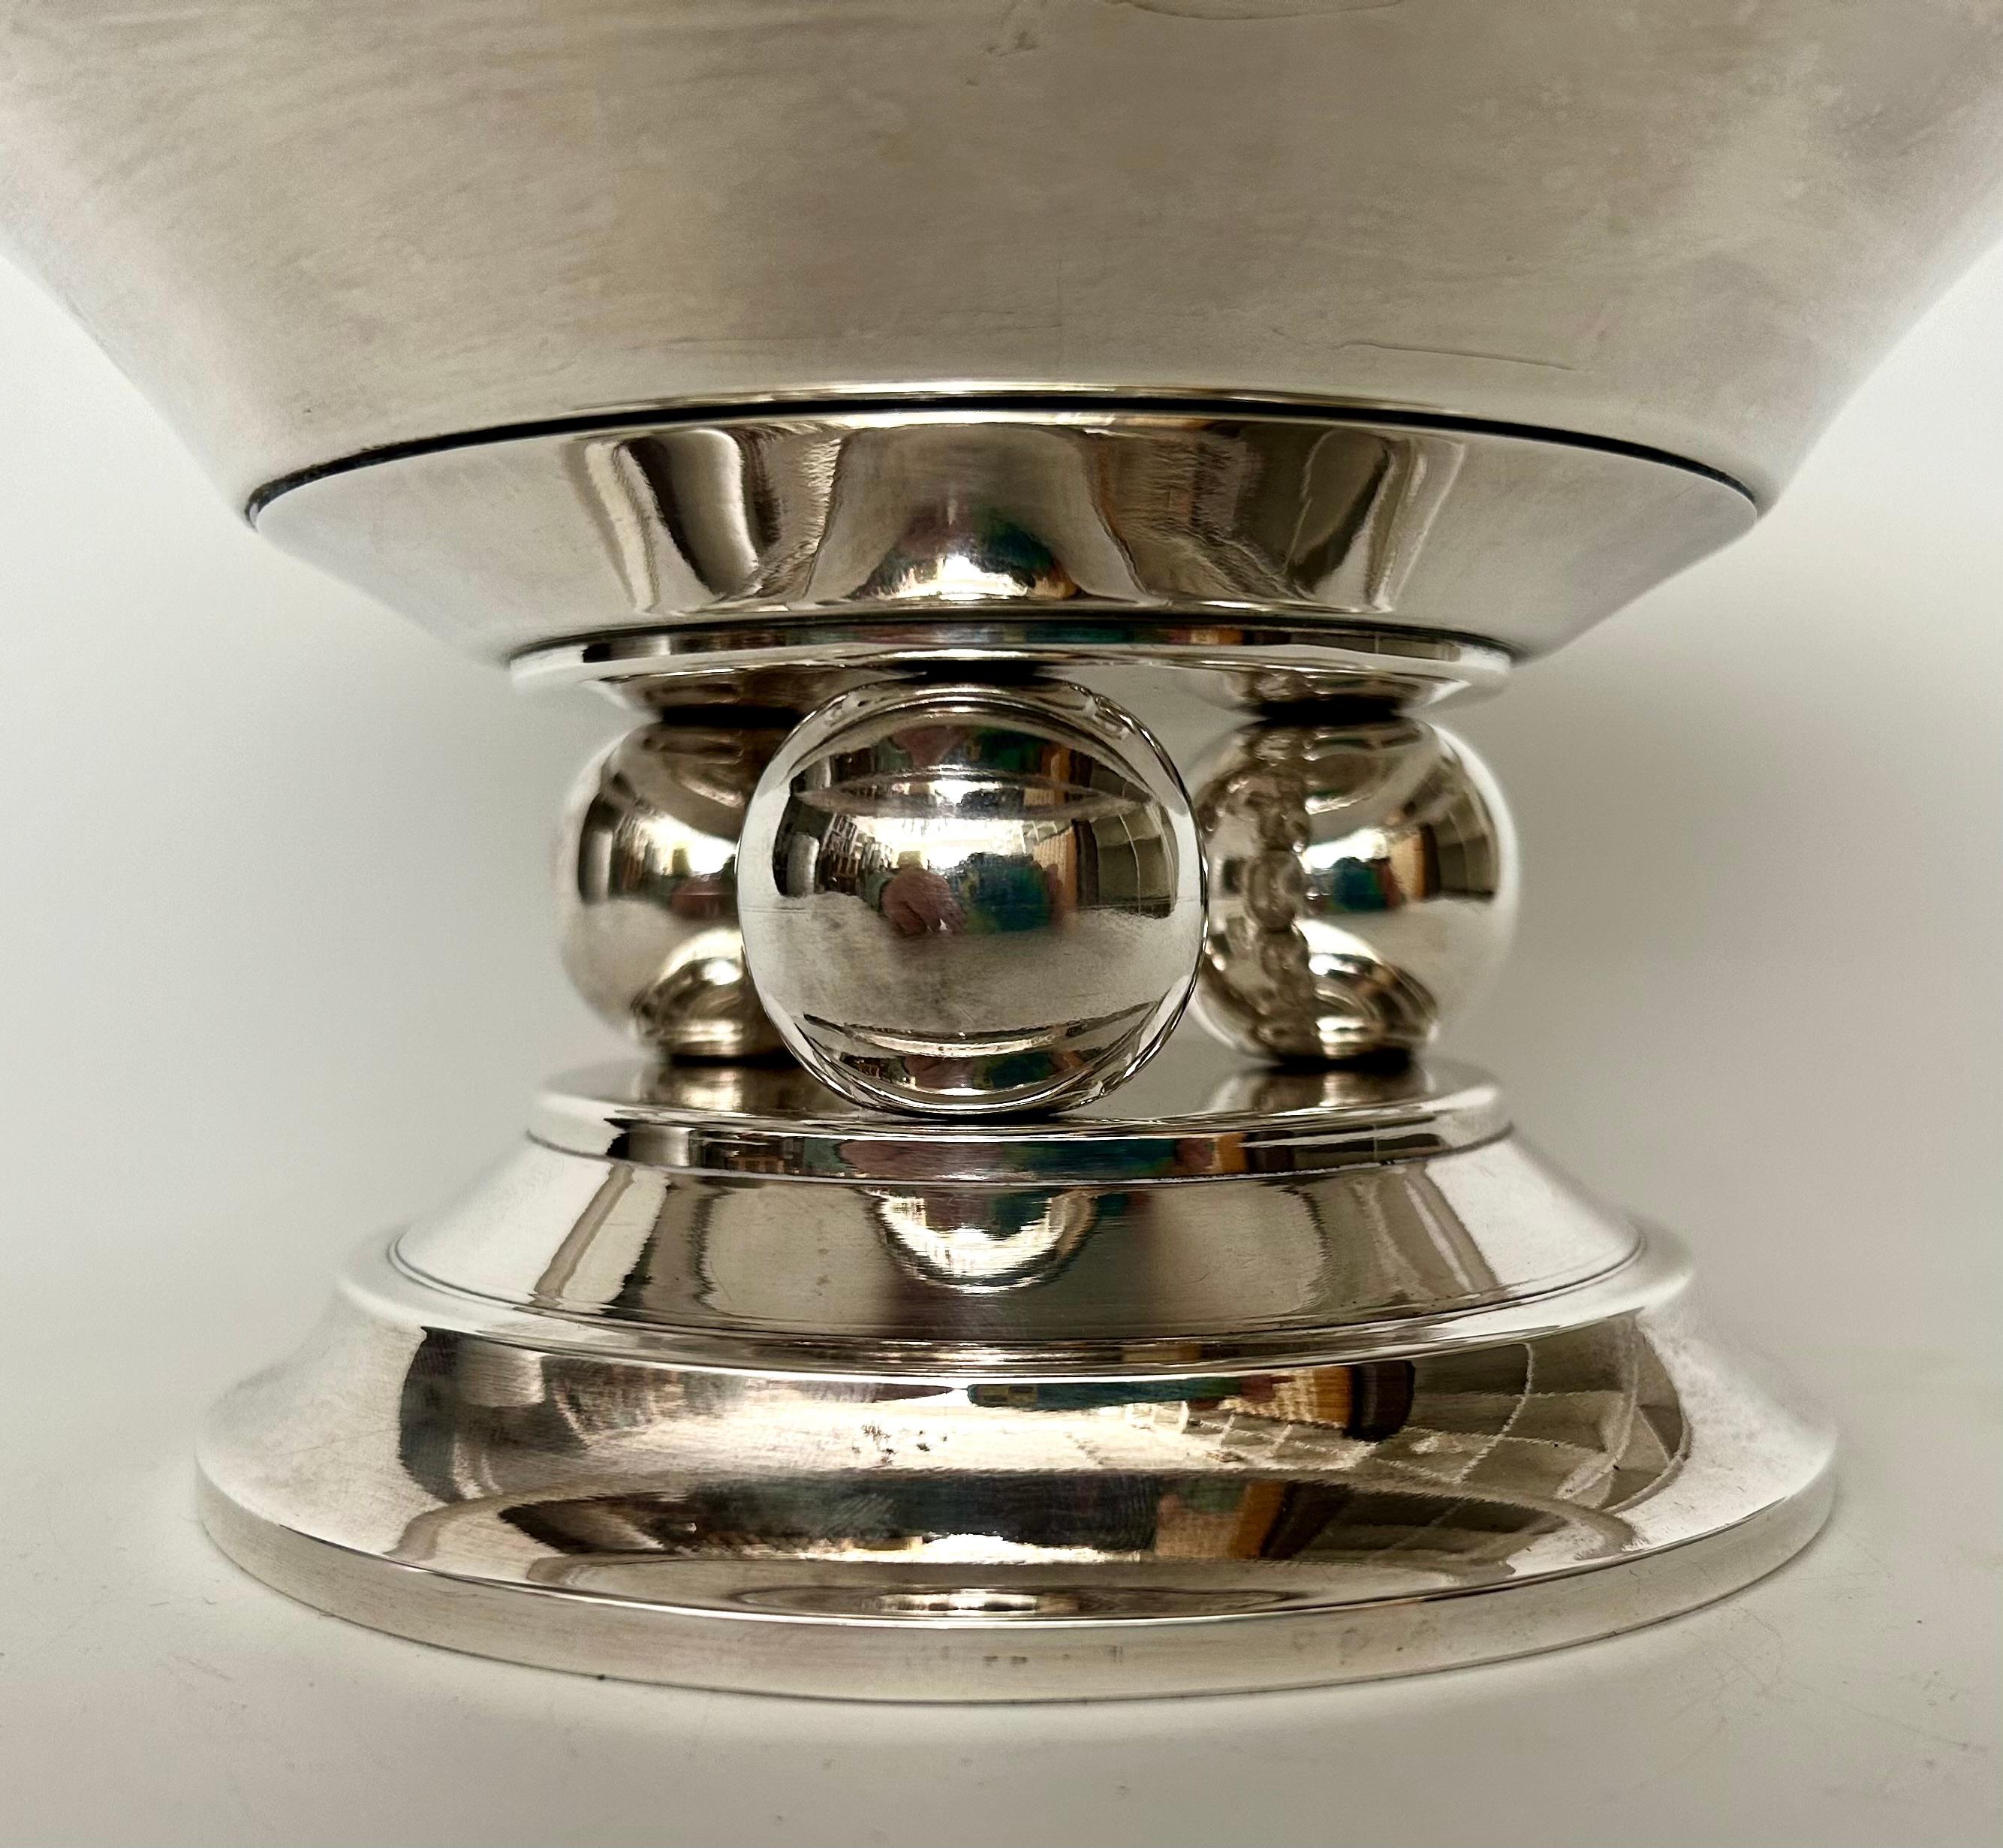 A large 1930s French Art Deco centrepiece in silverplate, with a wide dish sitting above three spheres and a stepped base, bearing the hallmark of Francois Frionnet, one of the master Silversmiths of the period.

Dimensions: H 14.5cm x D